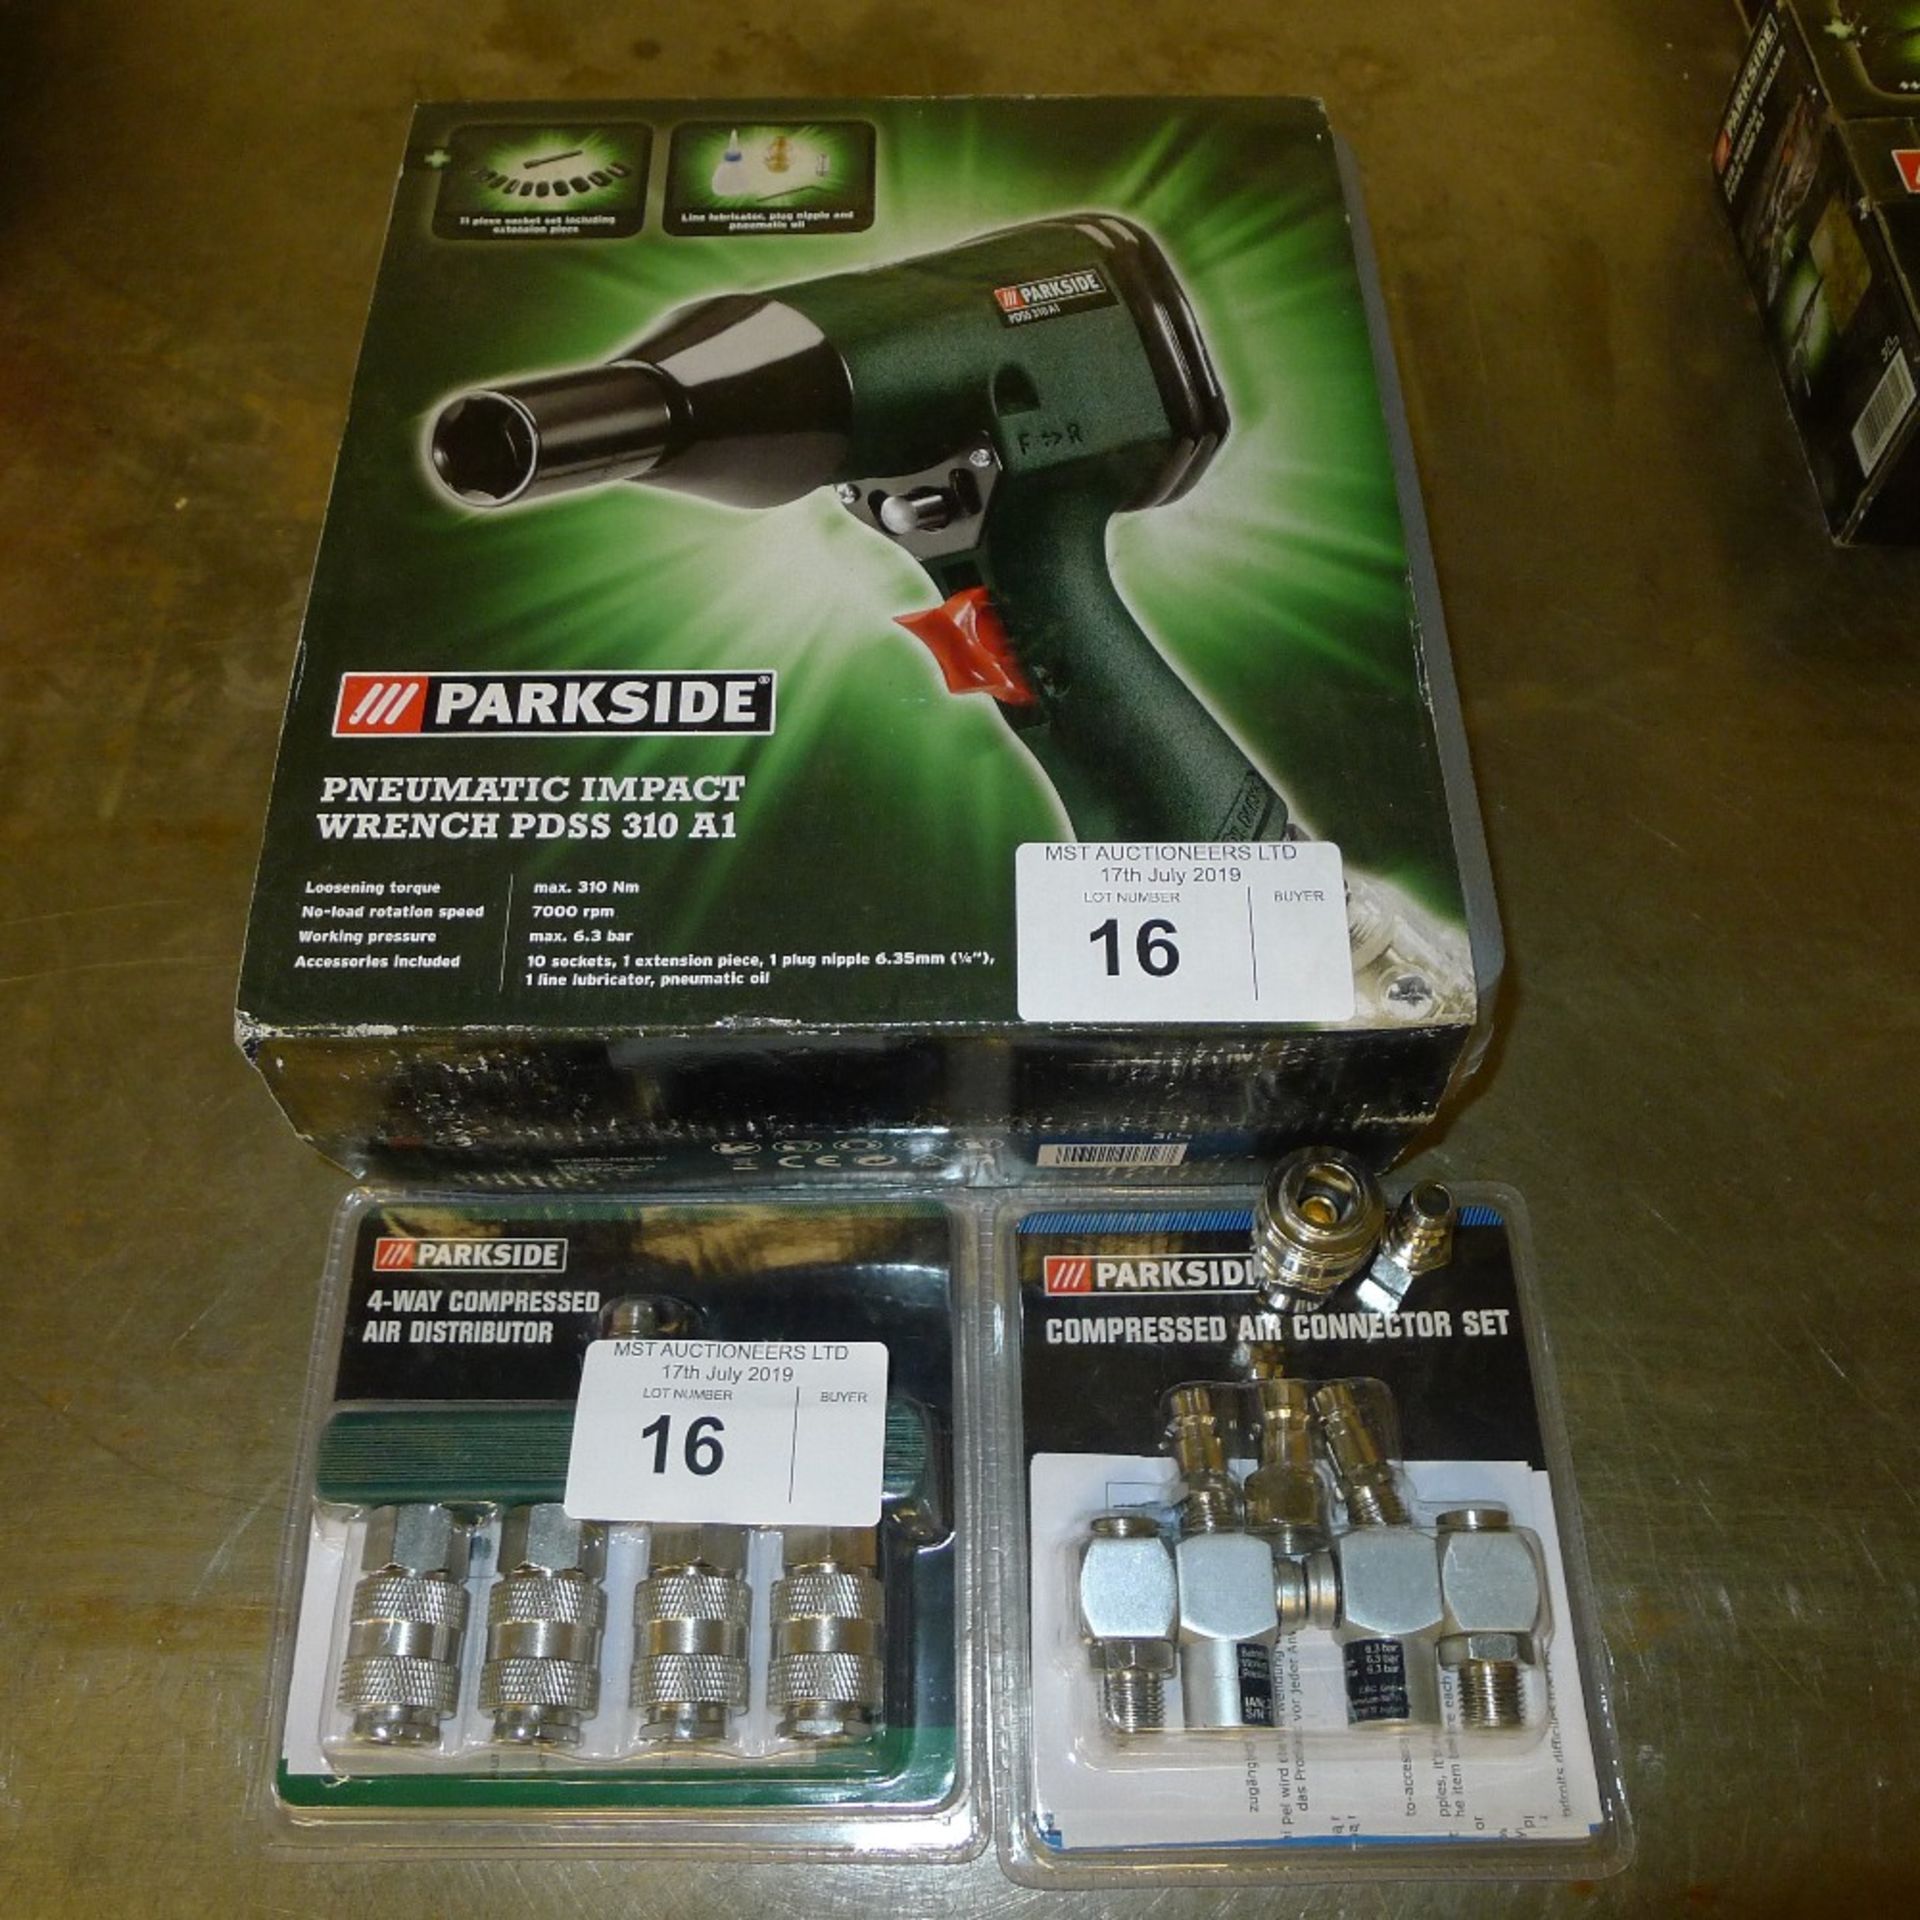 1 Parkside air impact wrench type PDSS 310A1, a 4 way air distributor and an air connector set